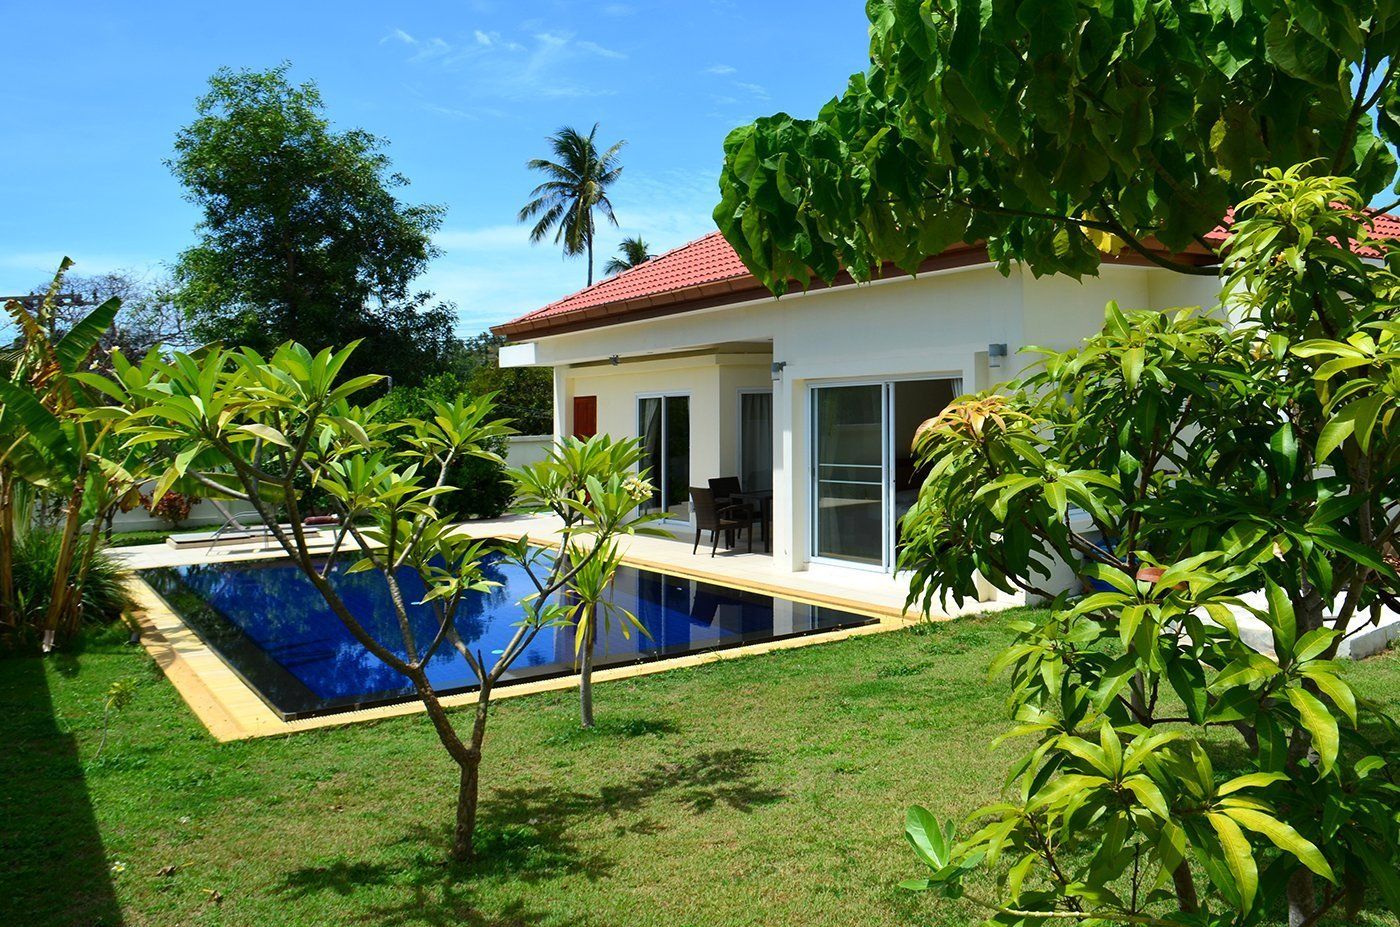 Two Bedroom Villa 5 Minutes Walk to the Beach.